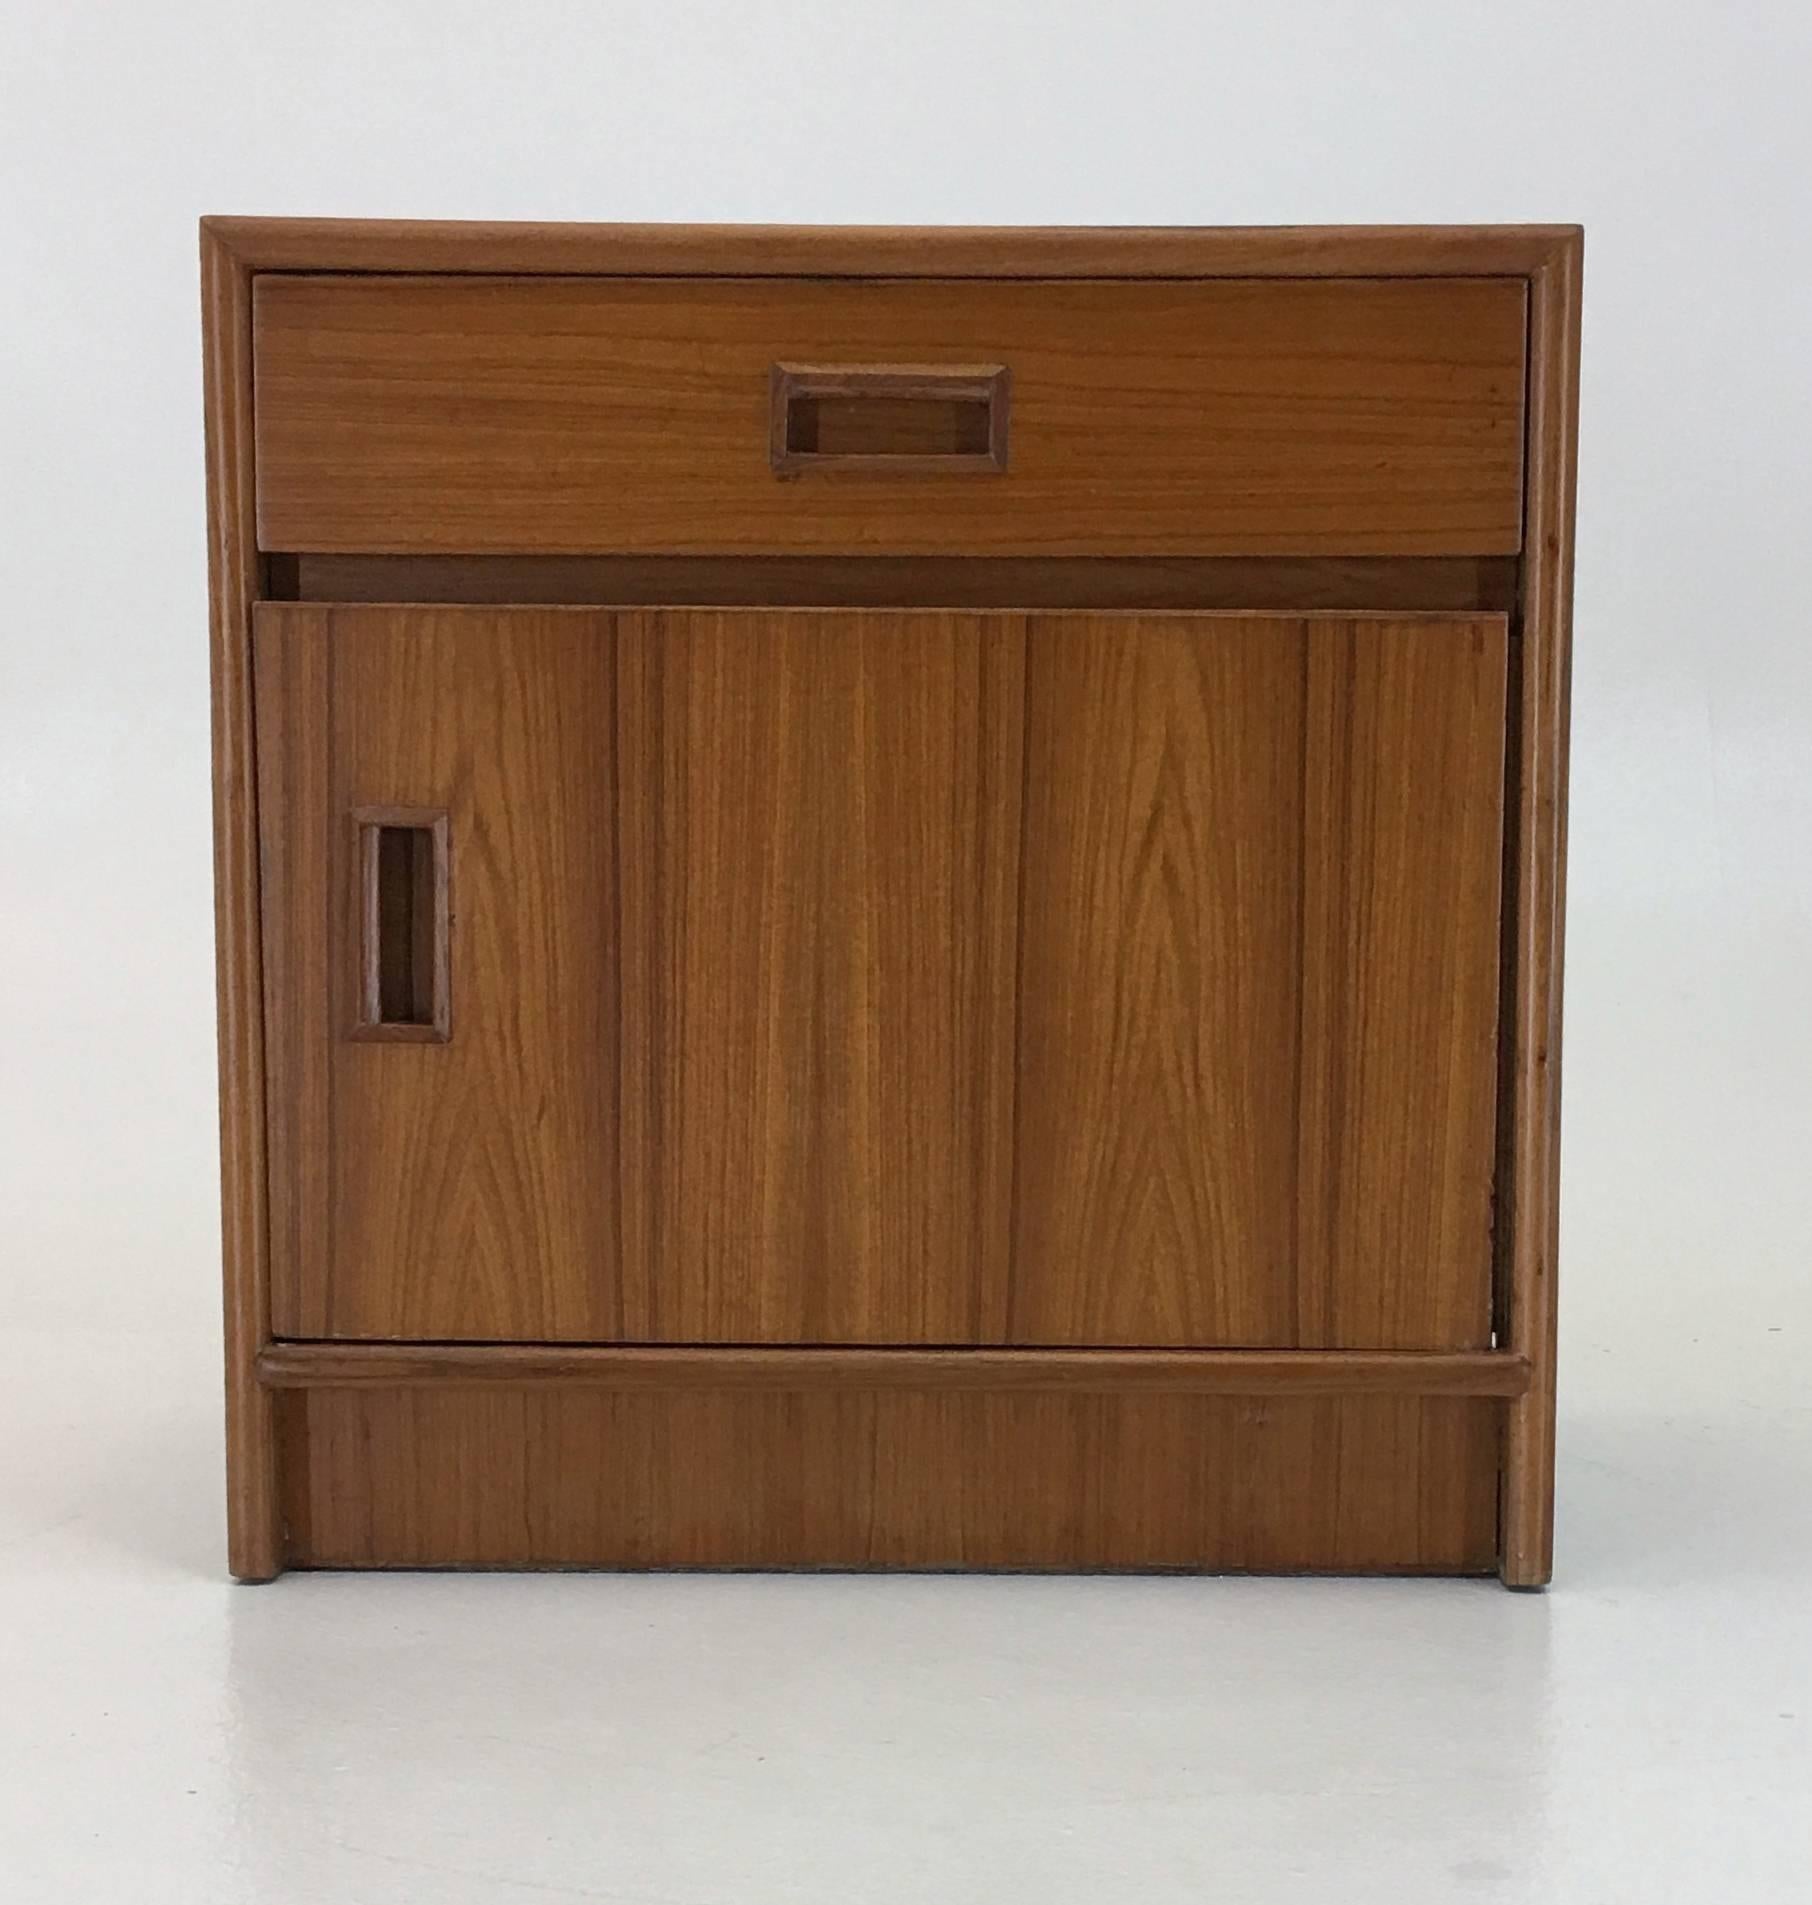 Denmark, circa 1970. Teak. Designer and cabinetmaker unknown, in the style of Børge Mogensen Each measures: 20 wide x 20.25 tall x 16.25 inches deep
Each unit has a slide out drawer and pull door connected with piano hinges. The condition is good